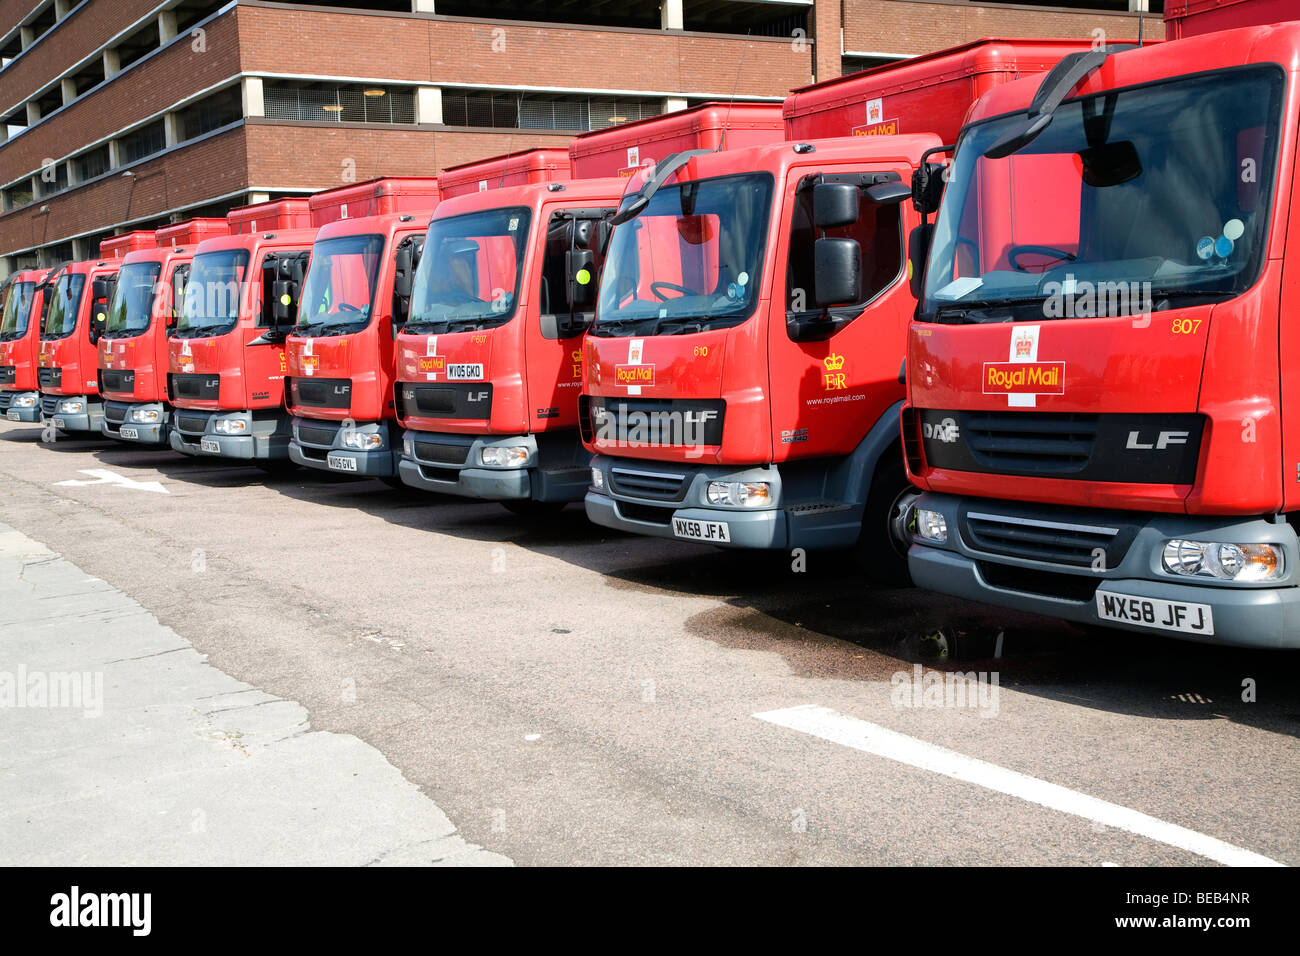 Royal mail lorries in line Stock Photo